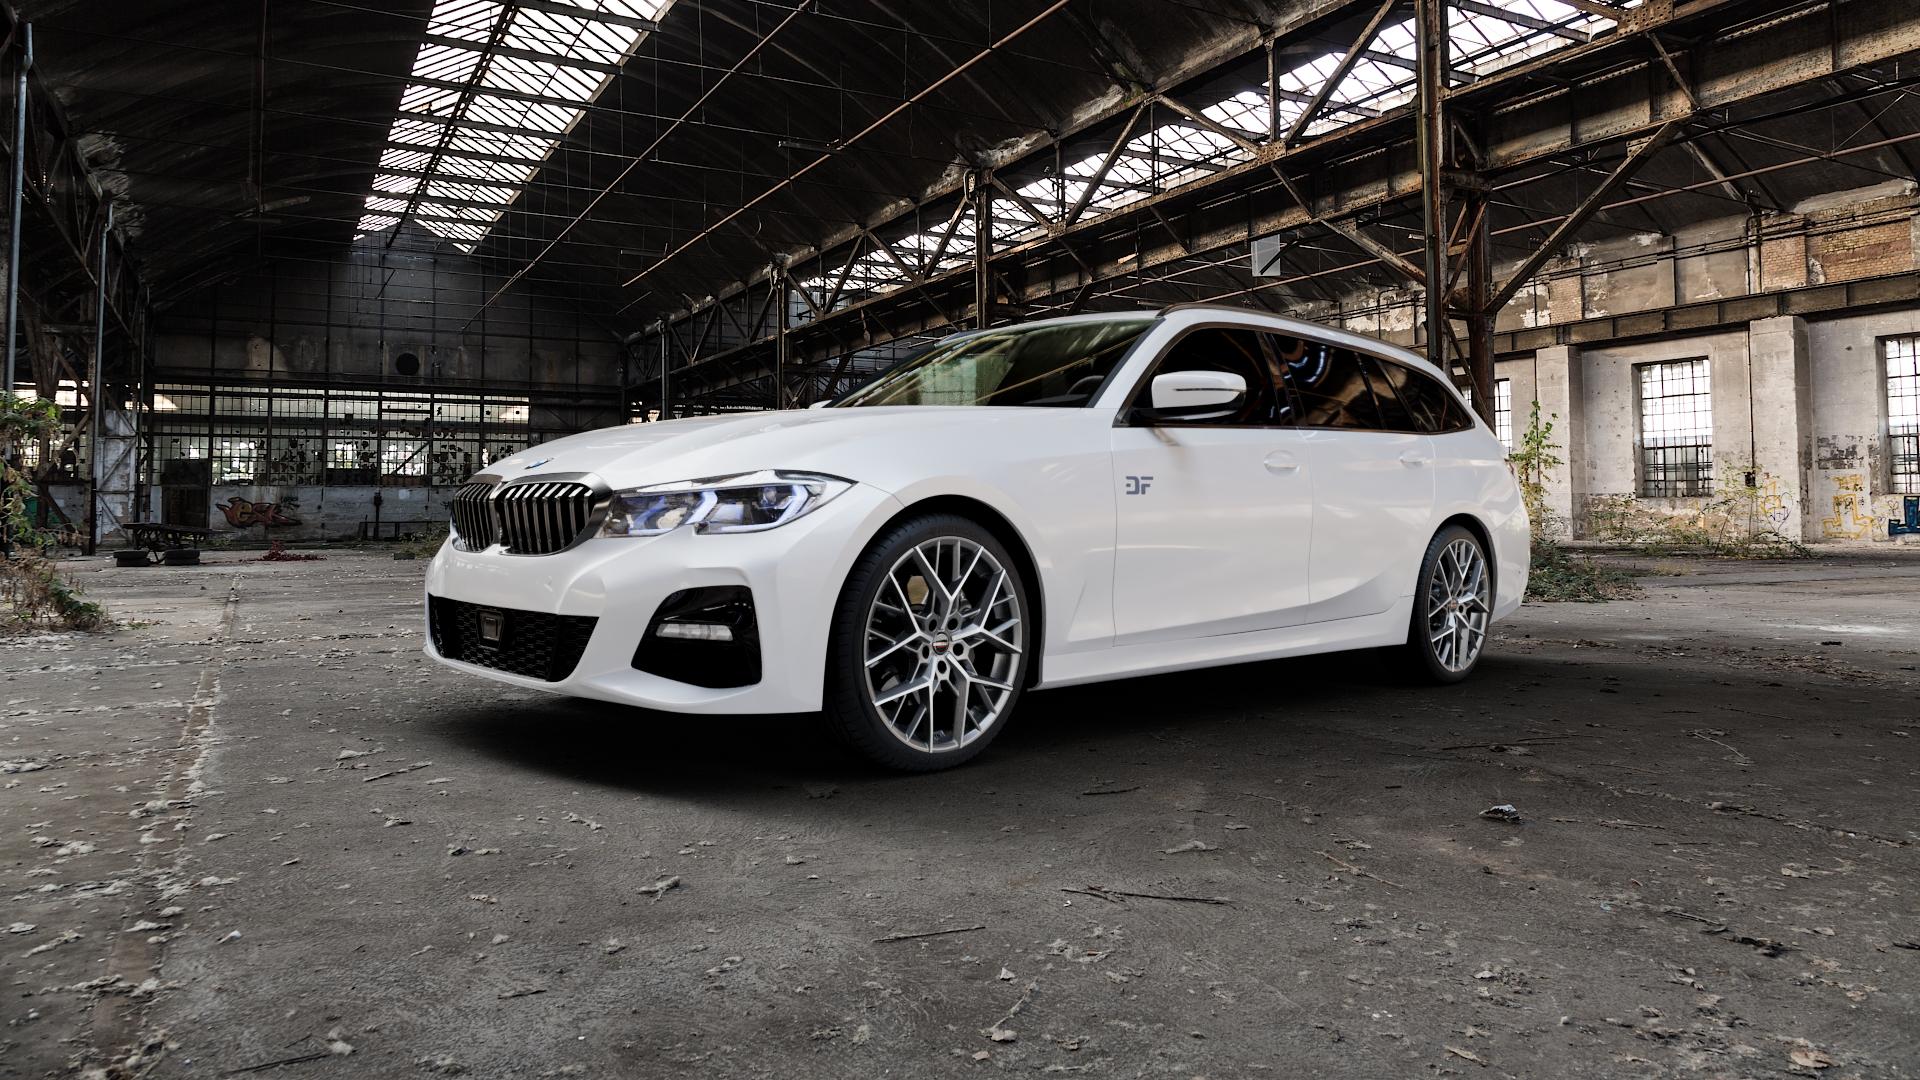 BMW 320i Type G21 (Touring) 2,0l 135kW (184 hp) Wheels and Tyre Packages |  velonity.com